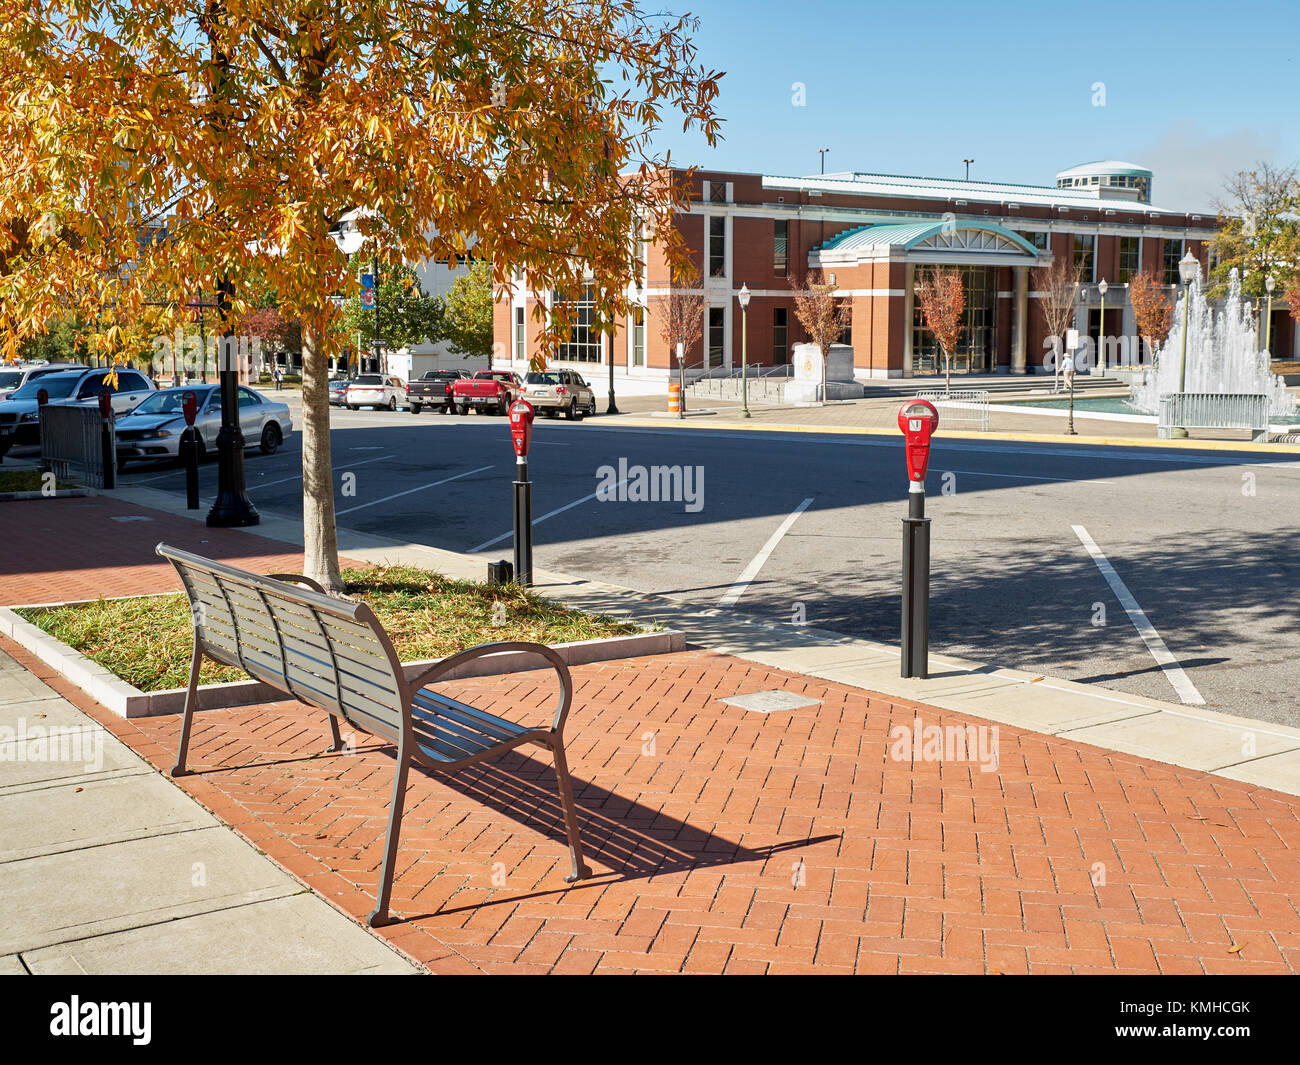 Empty parking spaces and a metal bench on a street in the downtown district of a city. Stock Photo